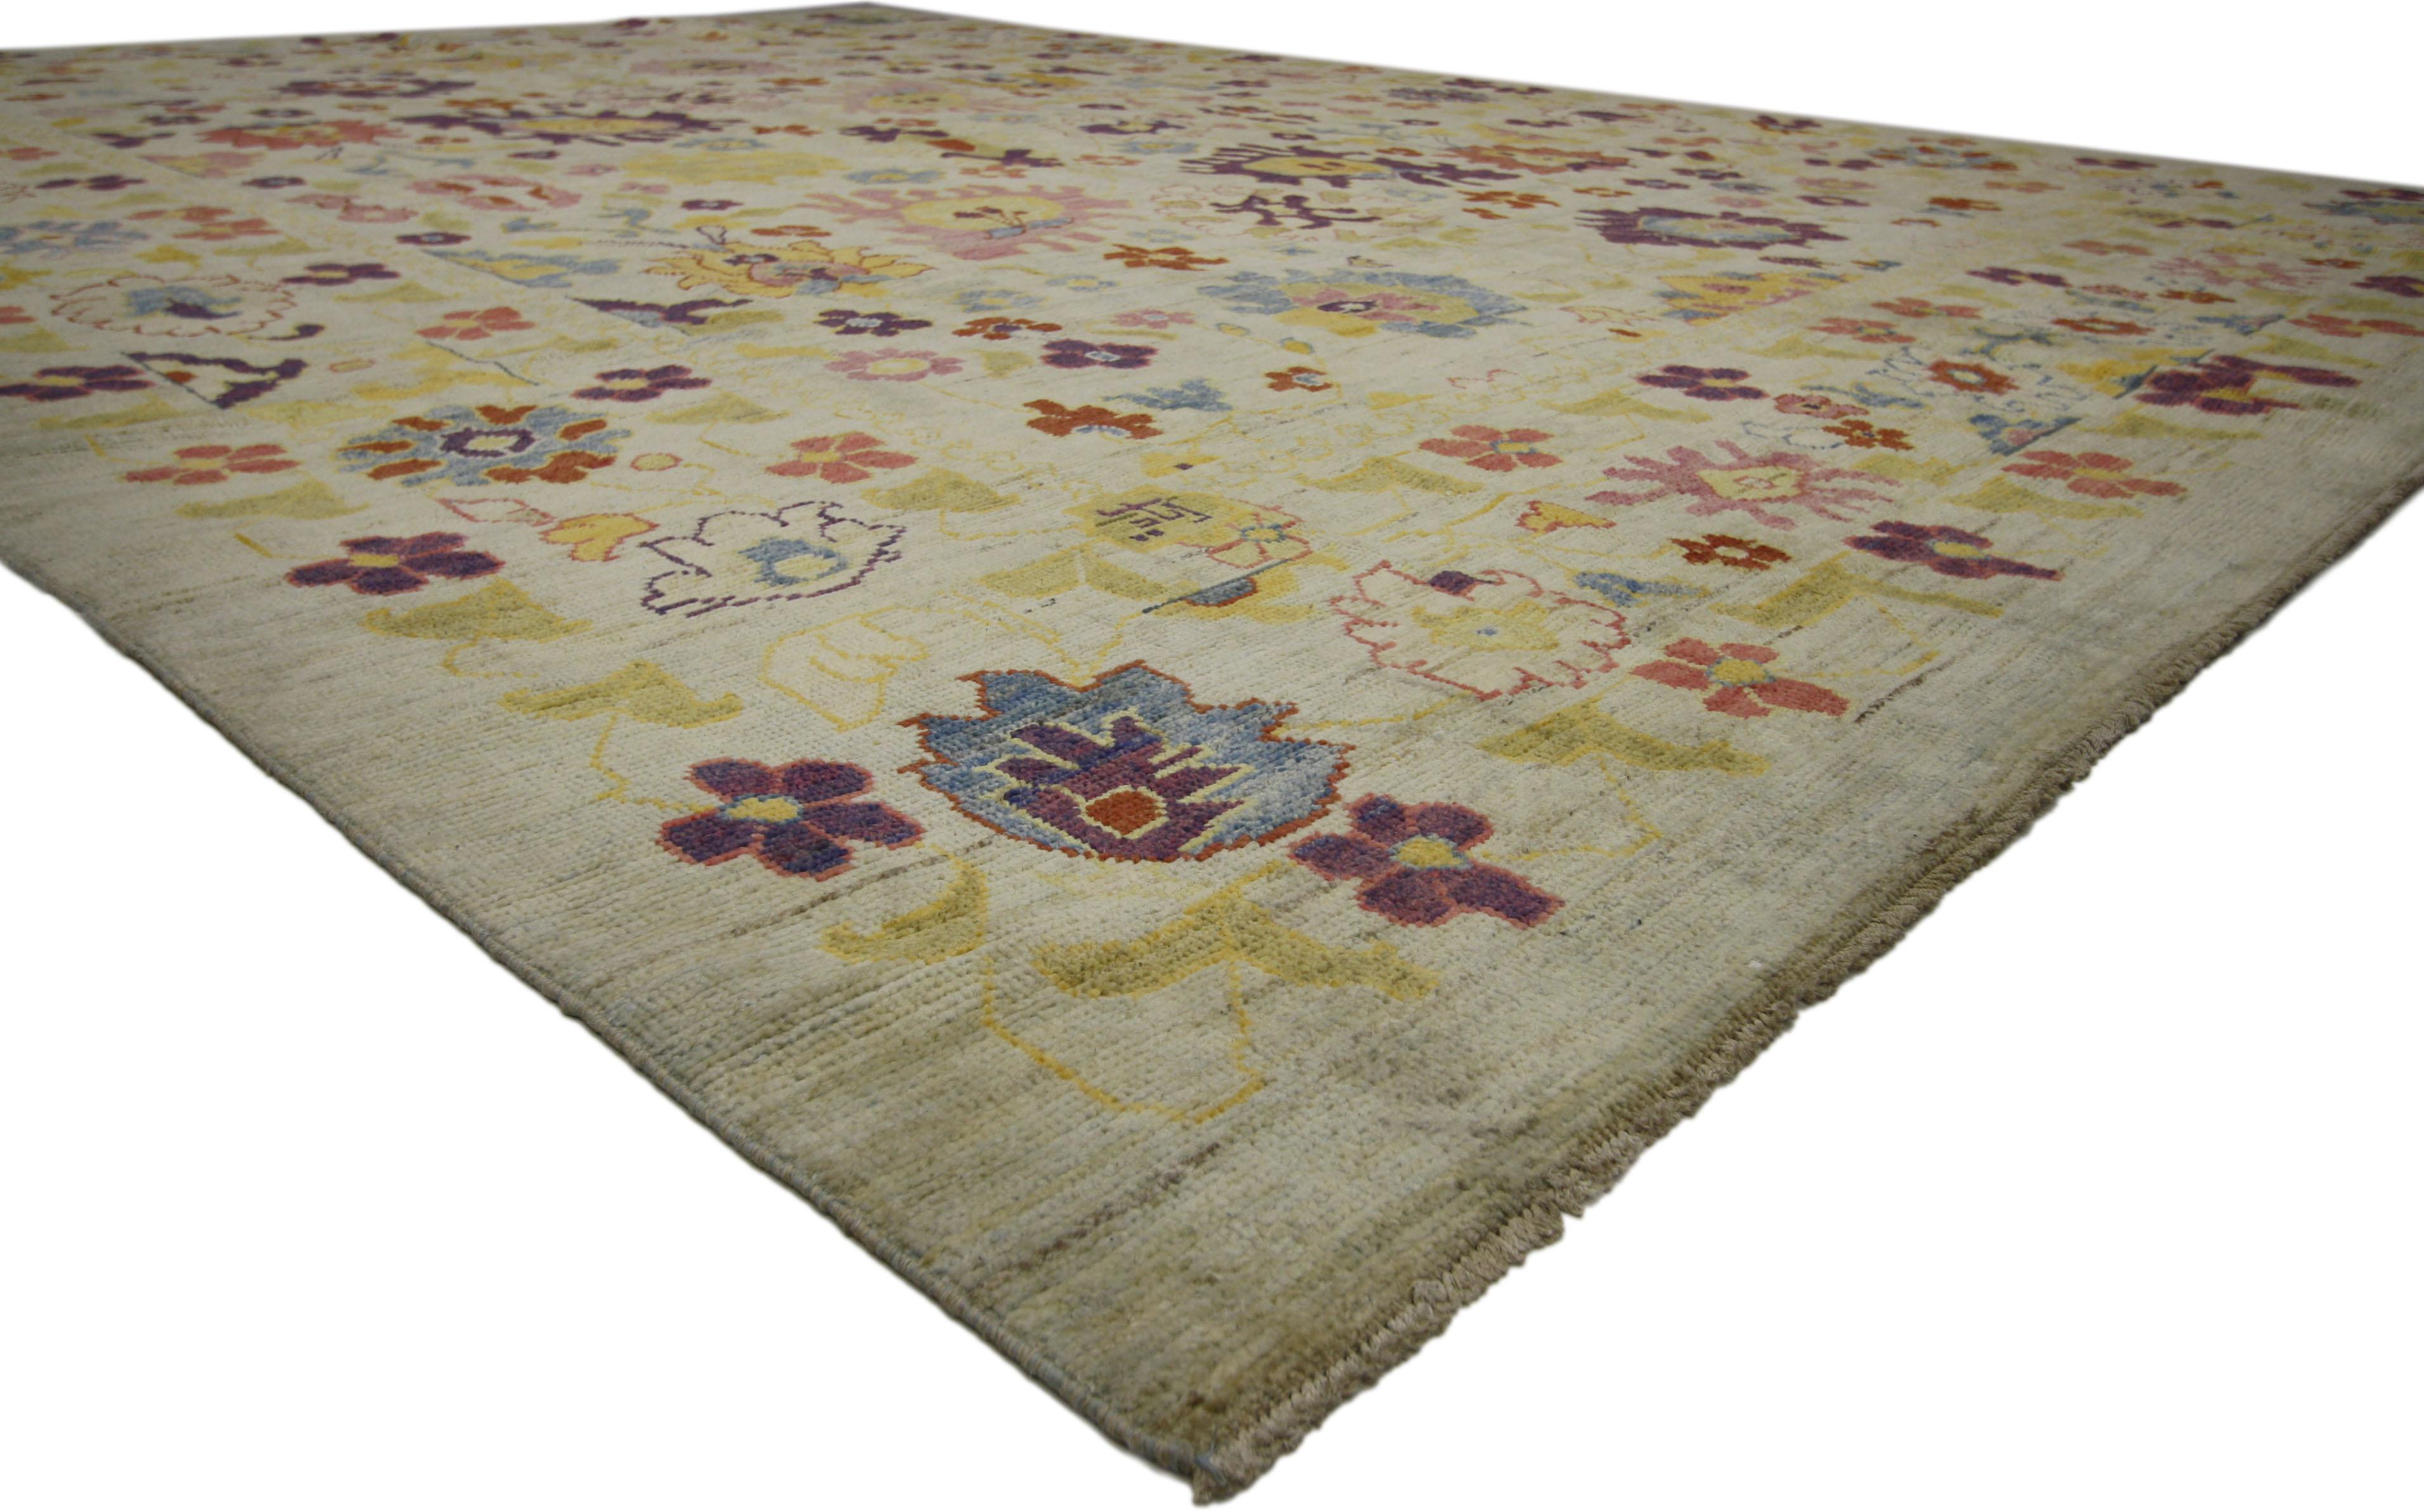 60659 New Colorful Turkish Oushak Rug with Modern Contemporary Style 12’01 x 16’01. Highly stylish yet tastefully casual, this is ideal for nearly any fashion-forward home. This timeless Oushak design has been given a twist to effortlessly accompany